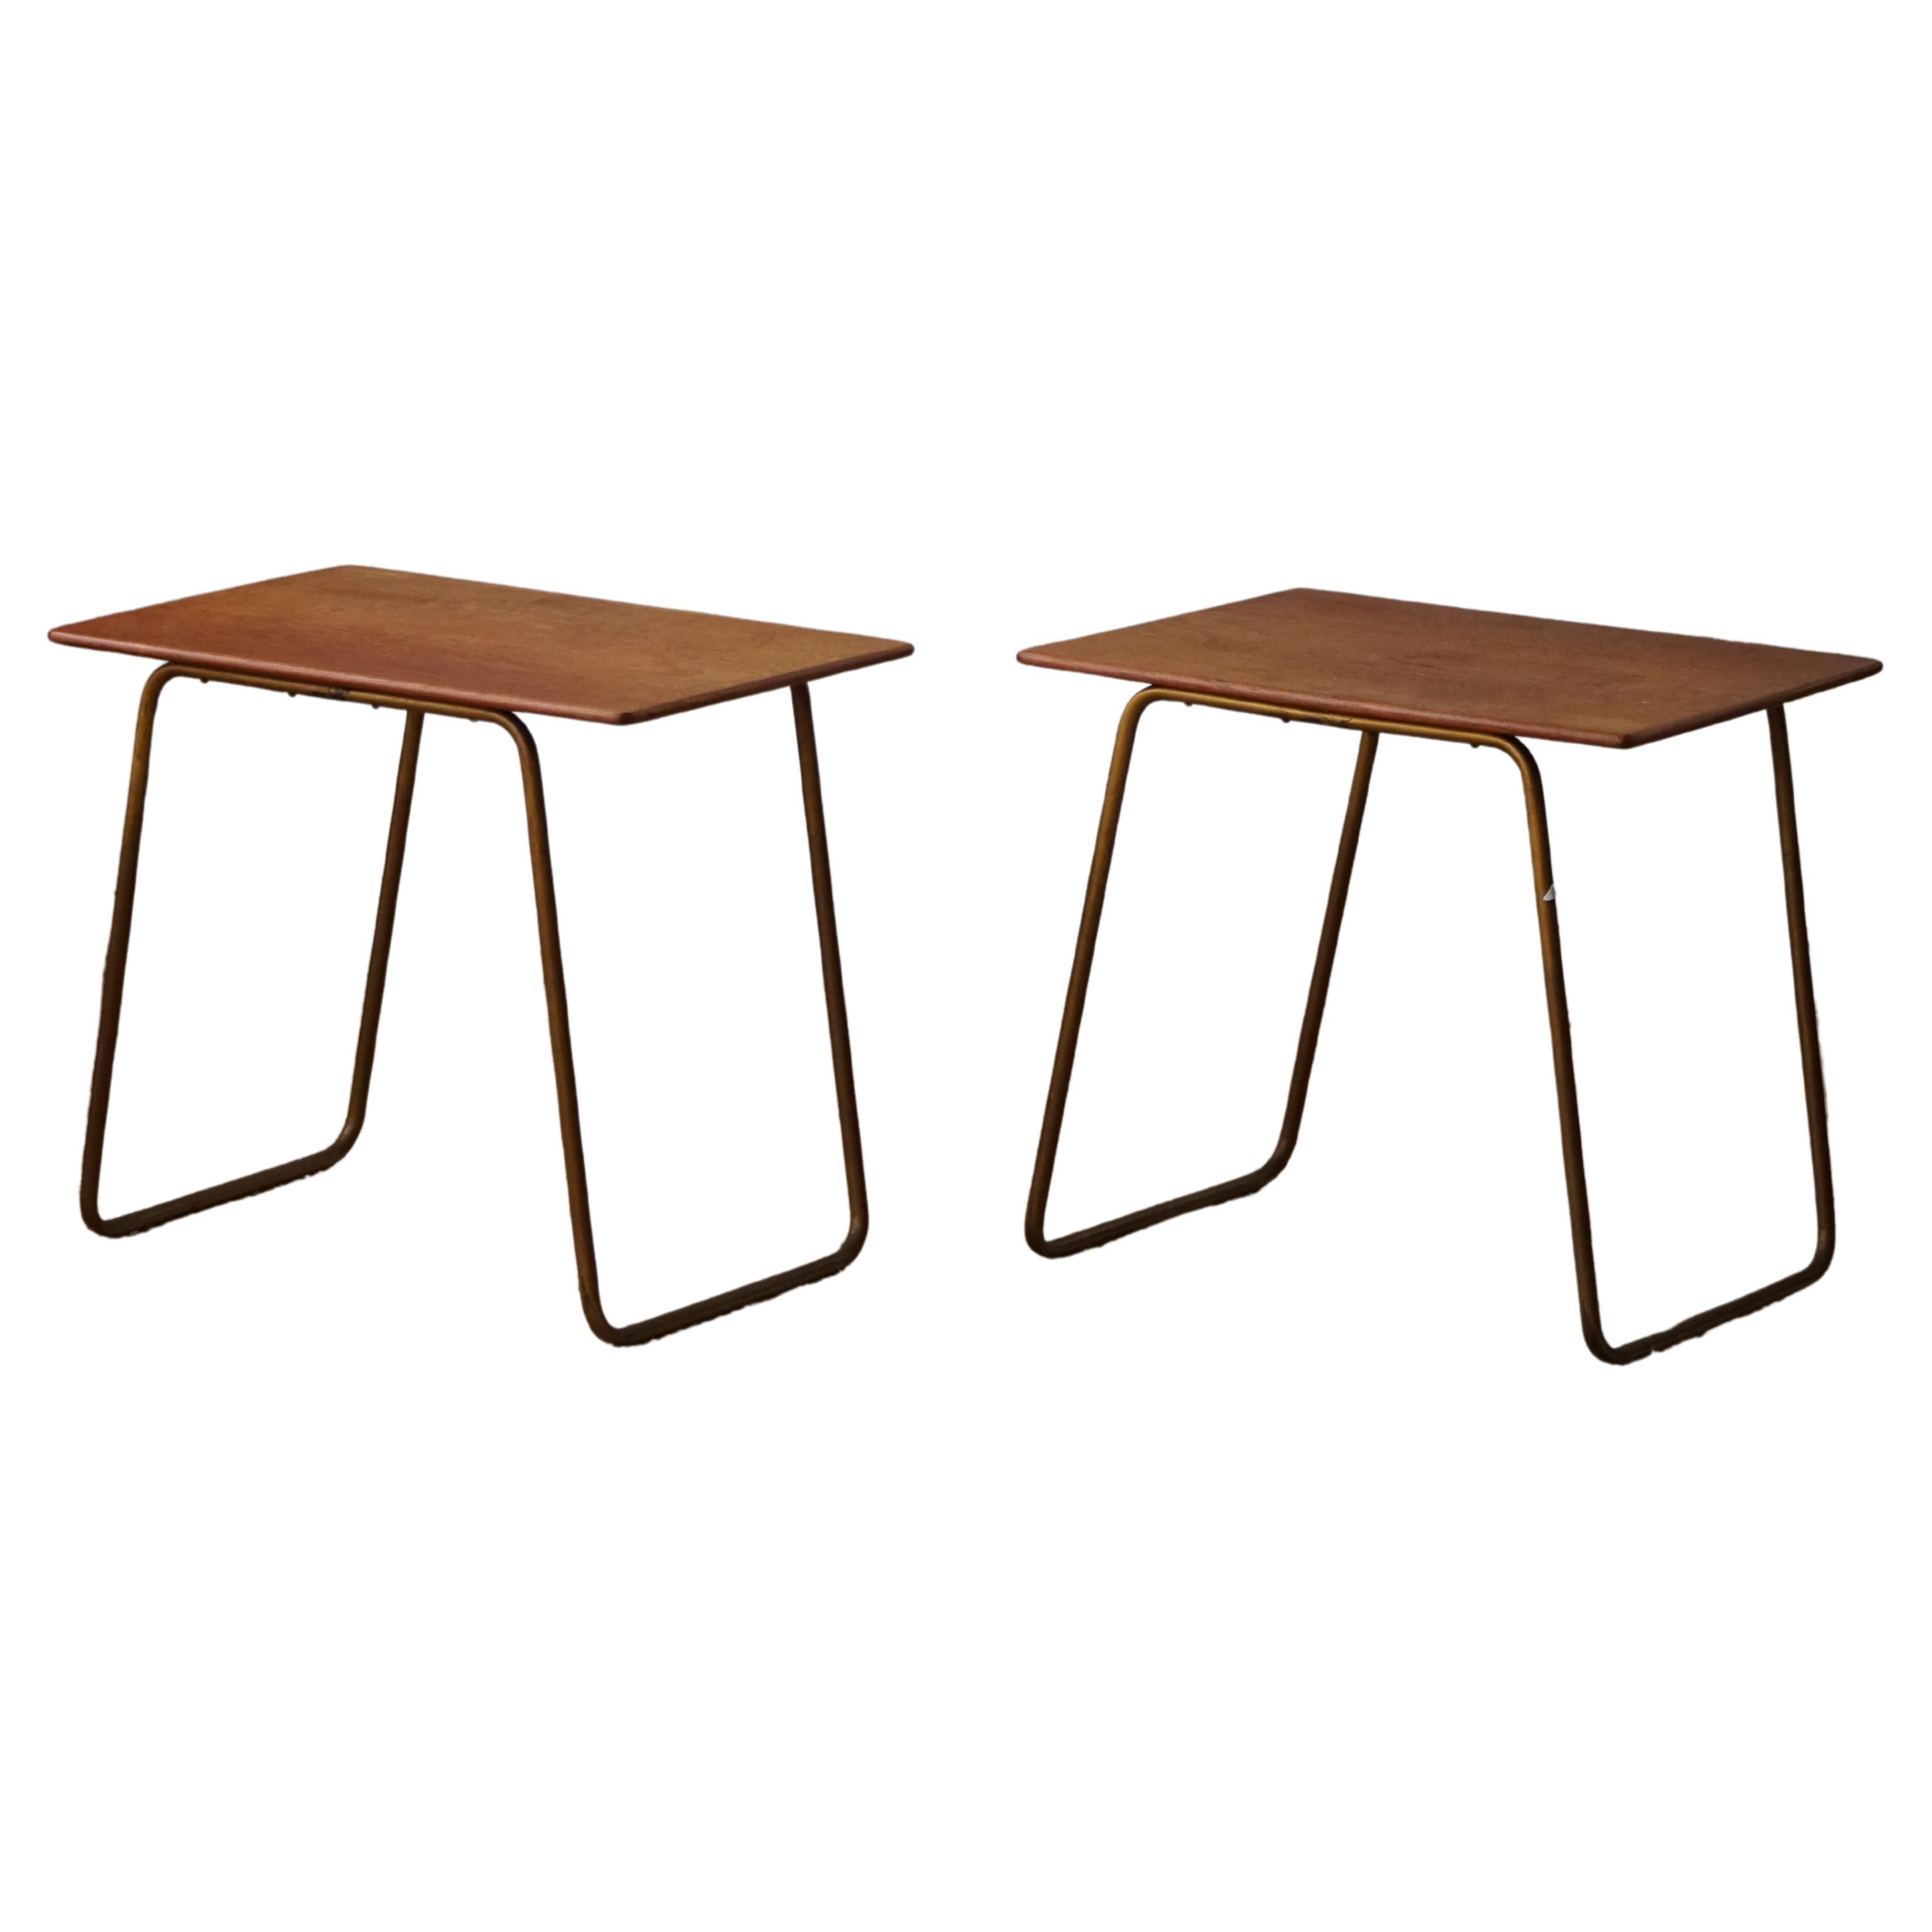 Pair of Side Tables in Teak and Steel, Danish Mid Century, 1960s